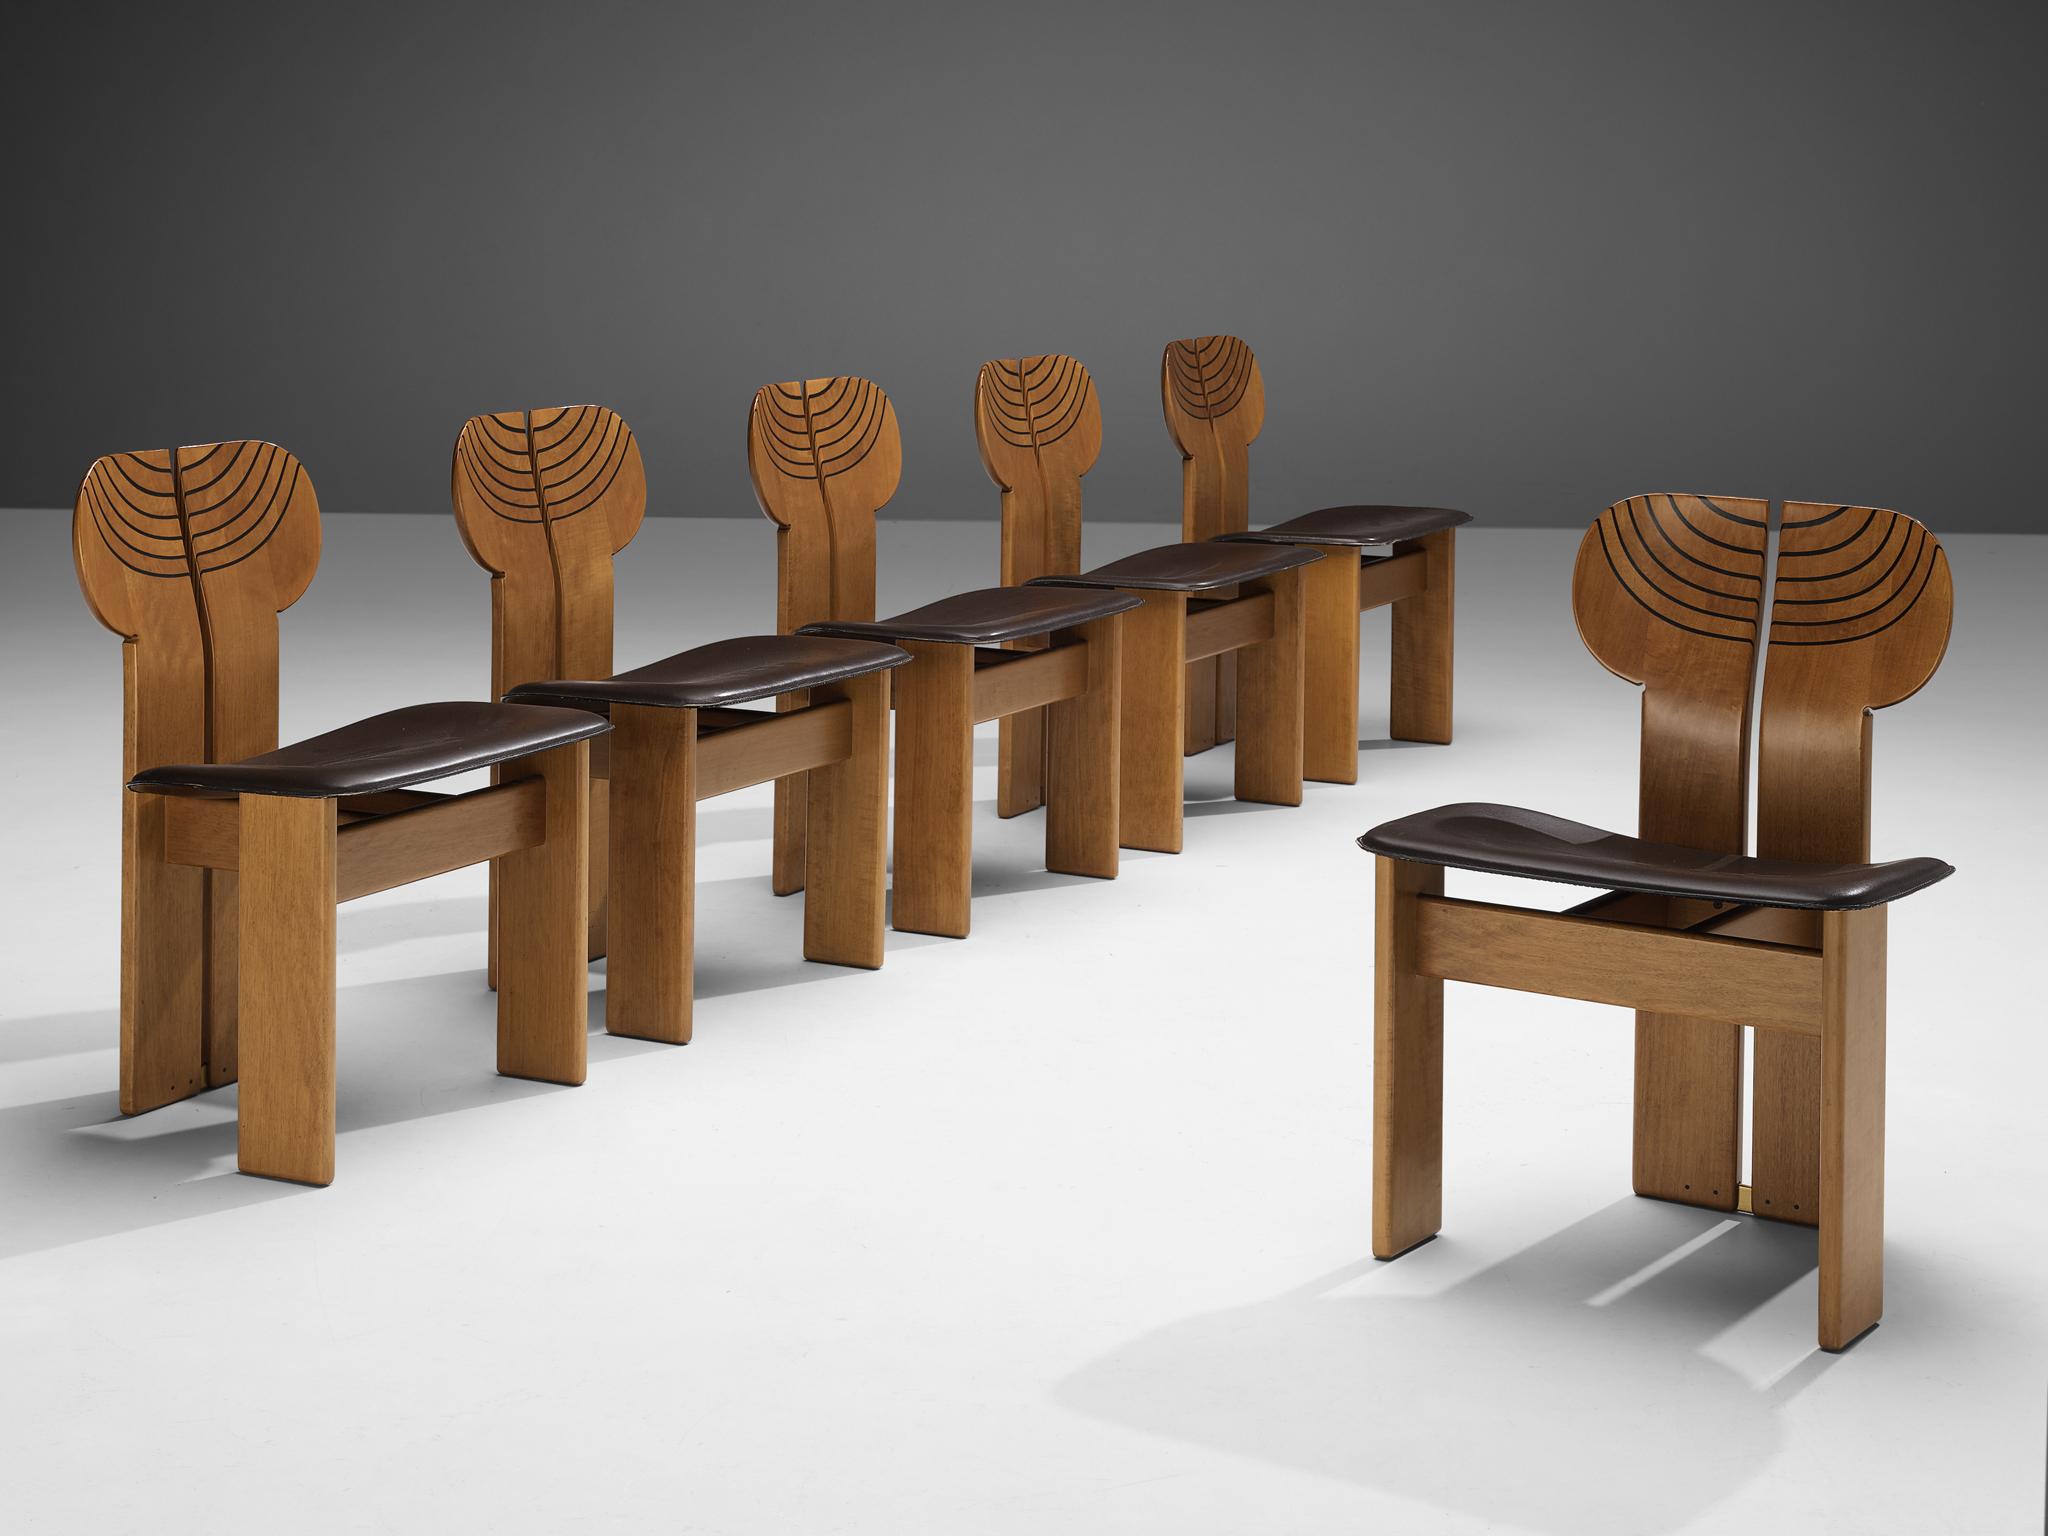 Afra & Tobia Scarpa for Maxalto, set of six dining chairs model 'Africa', dark grey leather, in walnut, ebony and brass, Italy, 1975.

This set of 'Africa' chairs explicitly sculptural grand chairs is designed by Afra & Tobia Scarpa. They are part